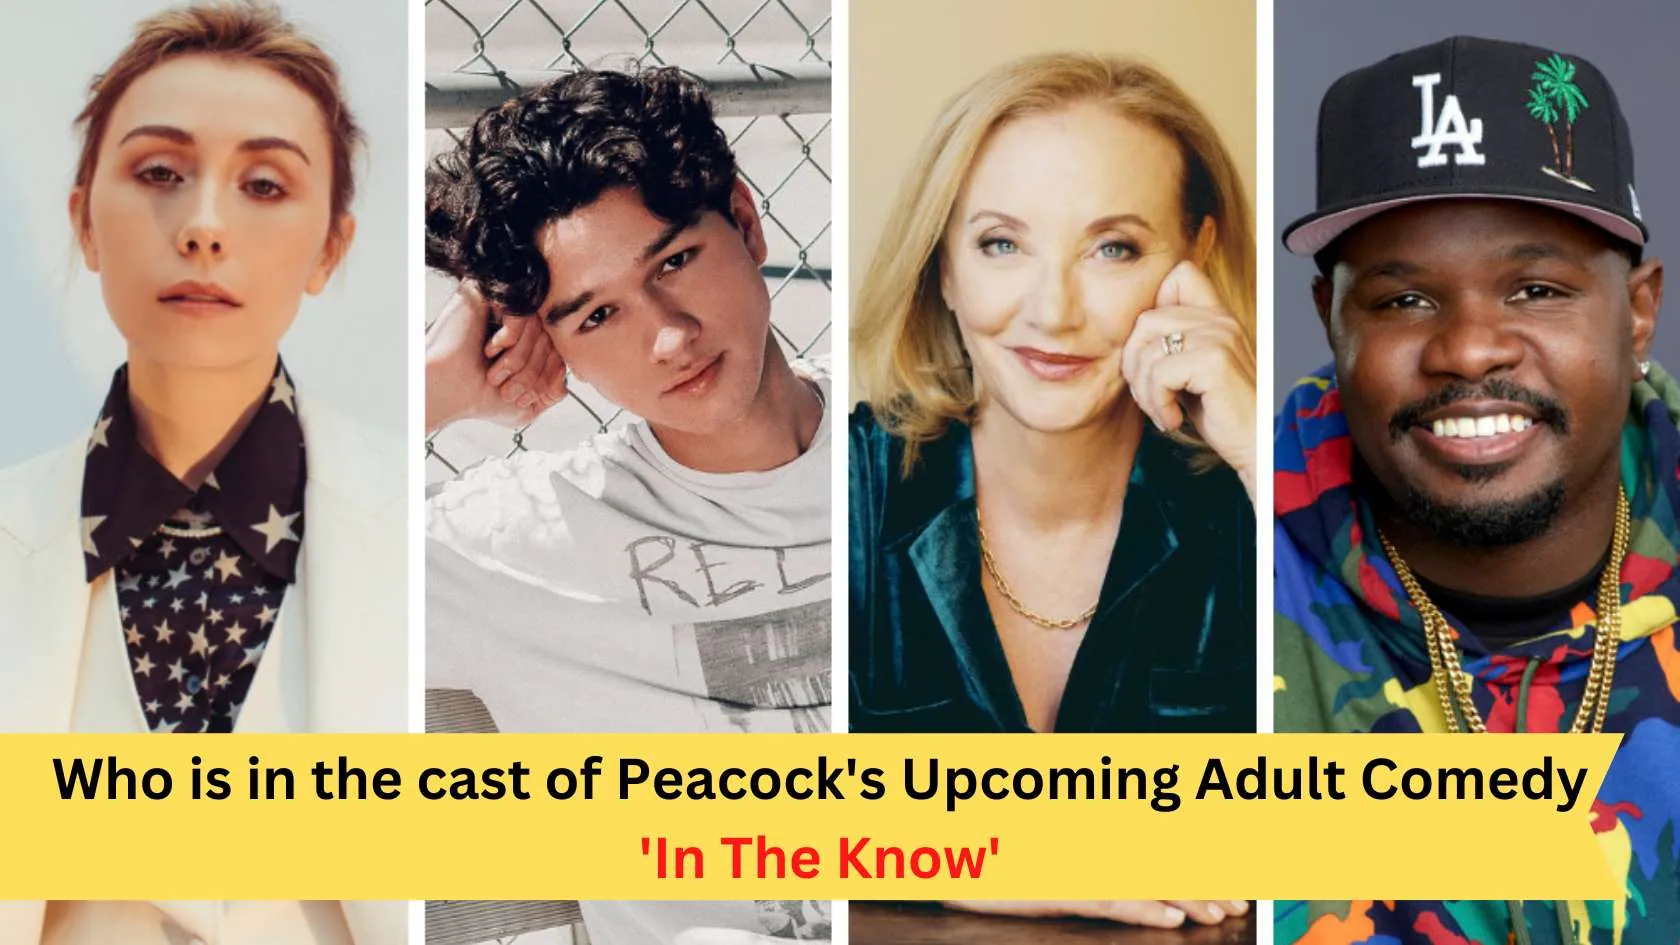 Who is in the cast of Peacock's Upcoming Adult Comedy series 'In The Know'